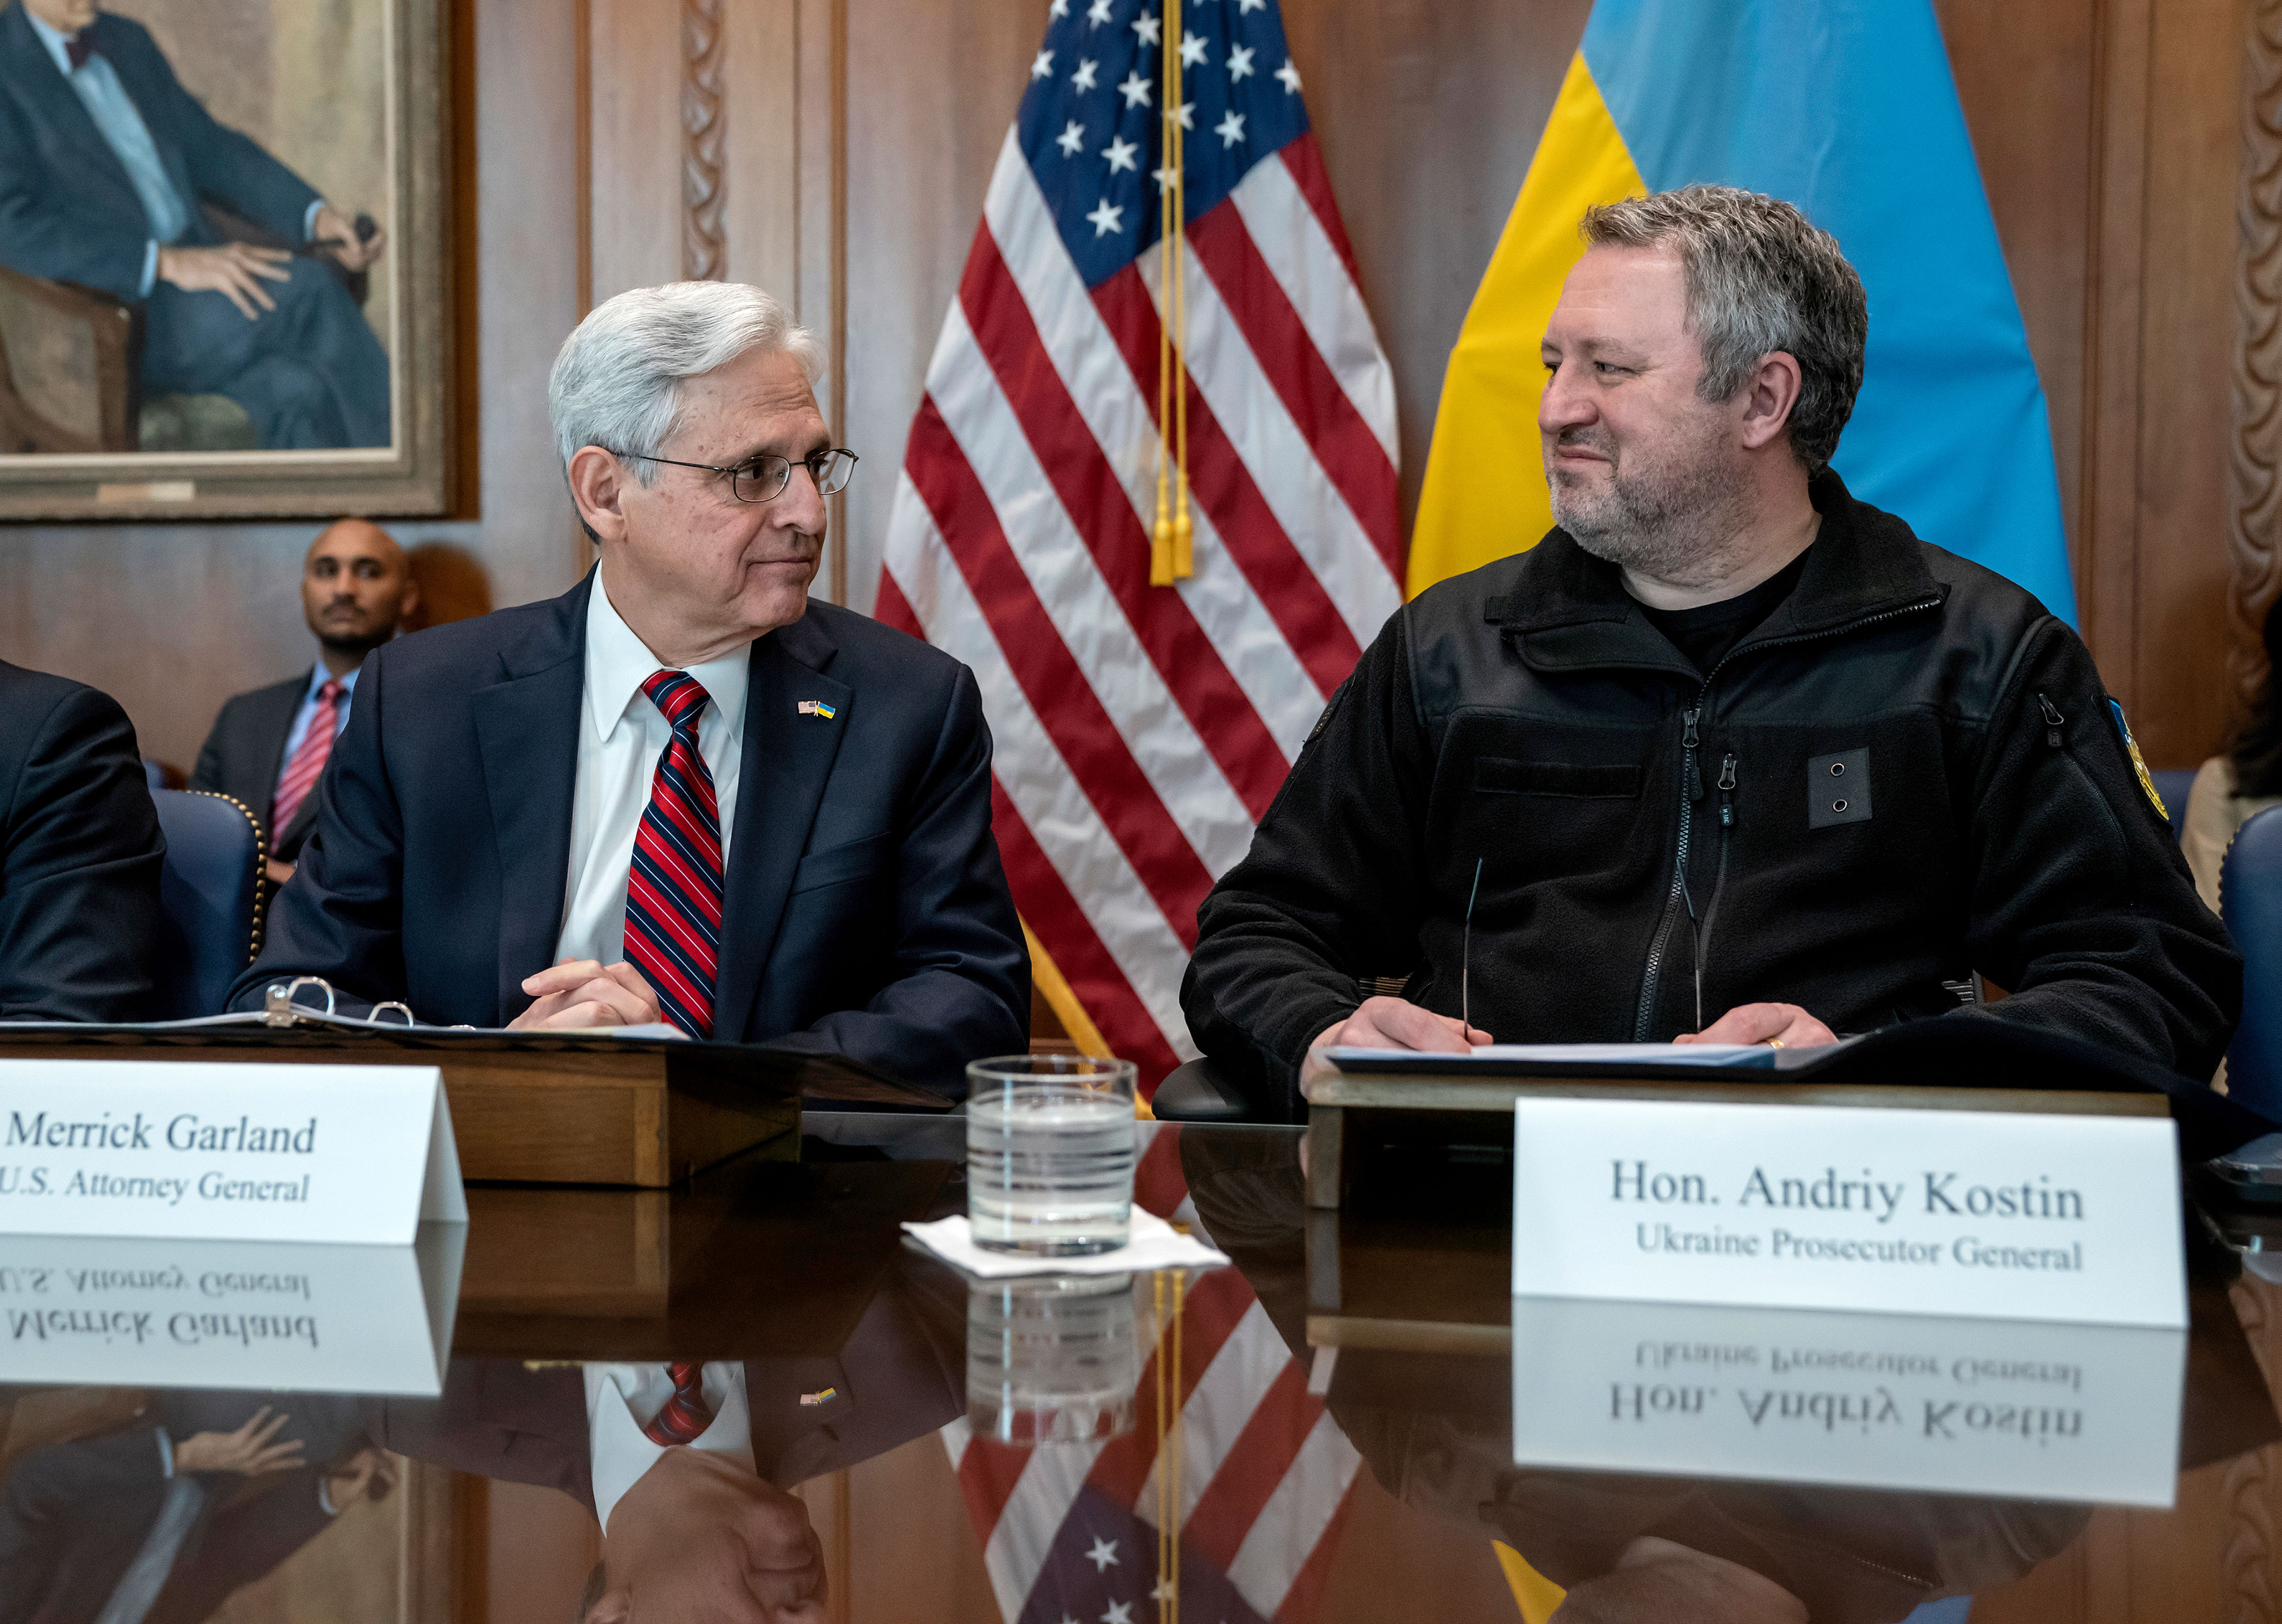 US Attorney General Merrick Garland, left, meets with Ukrainian Prosecutor General Andriy Kostin and officials at the Justice Department in Washington, DC, on February 3. 